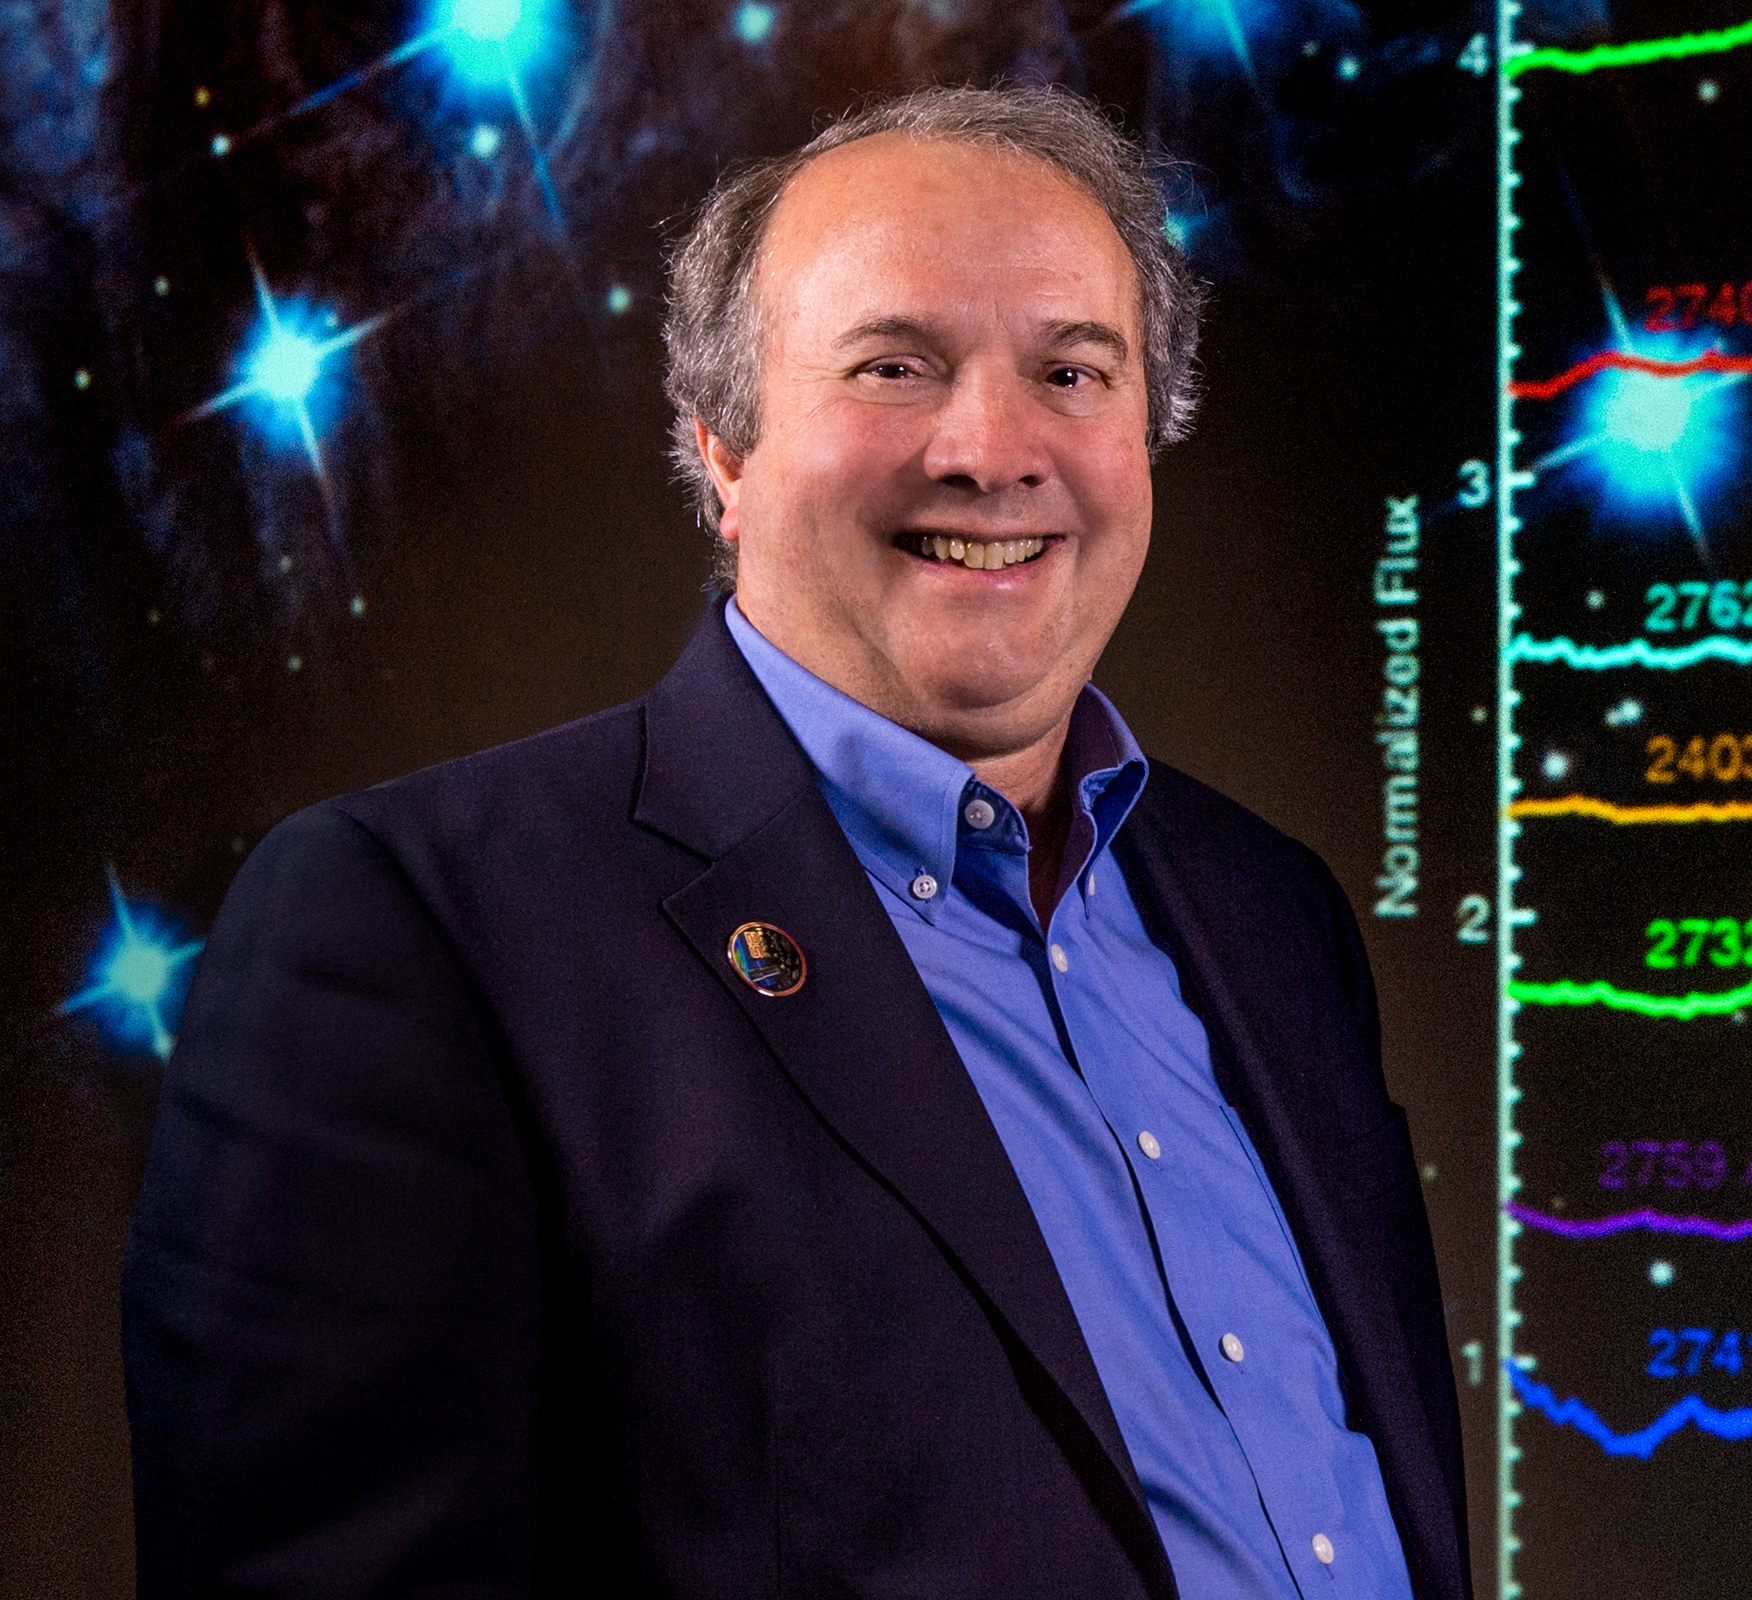 Ken Carpenter smiles wearing a blue dress shirt with a navy jacket. The background is an image of stars with diffraction spikes visible and a chart to the far right.